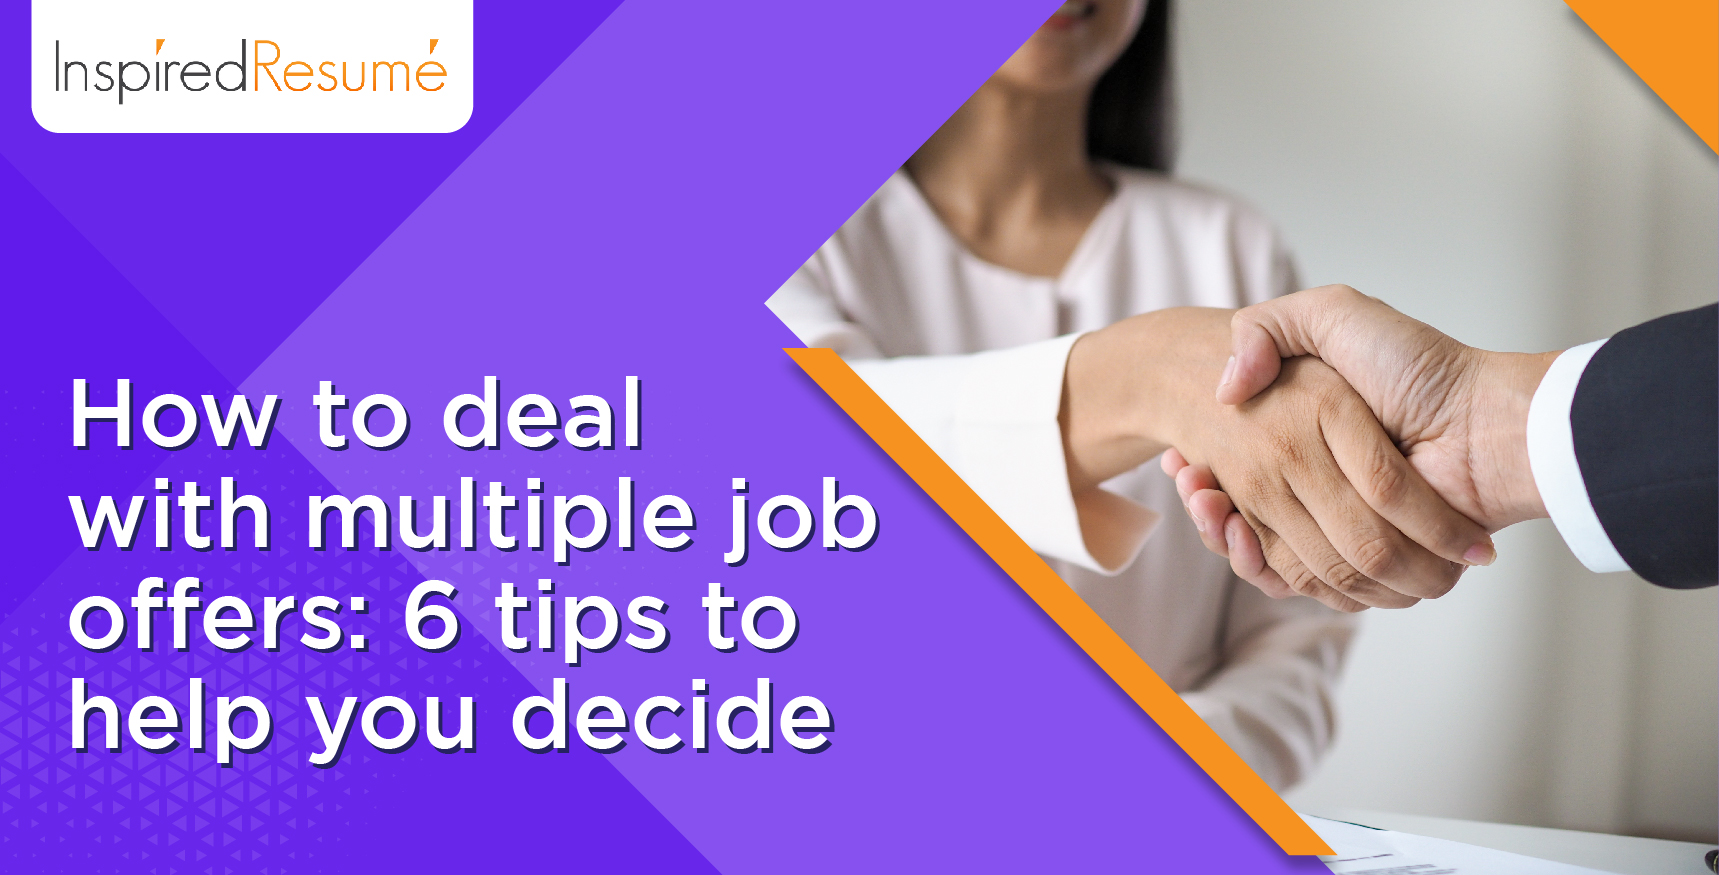 How to deal with multiple job offers: 6 tips to help you decide